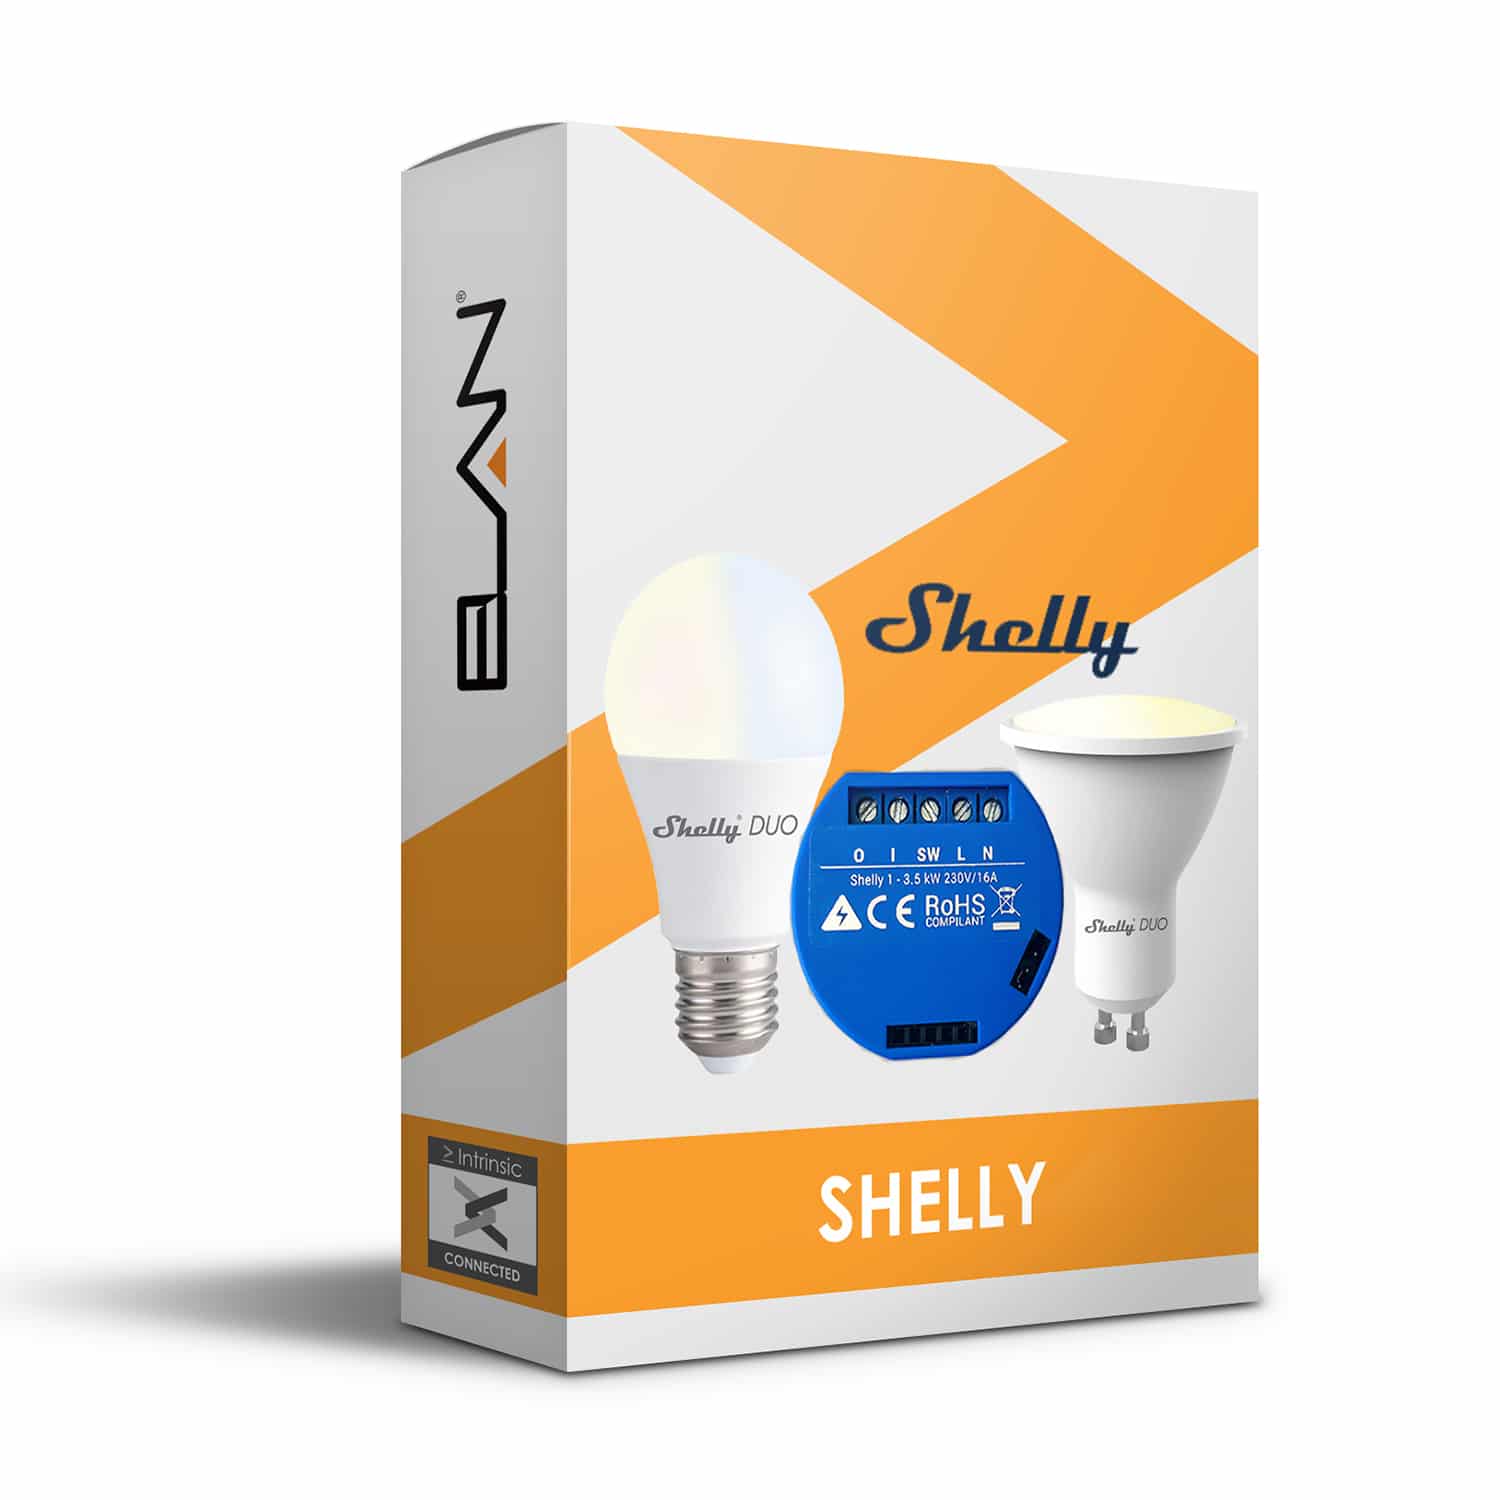 Shelly 1 Mini Gen3 - All products - Shop - Shelly